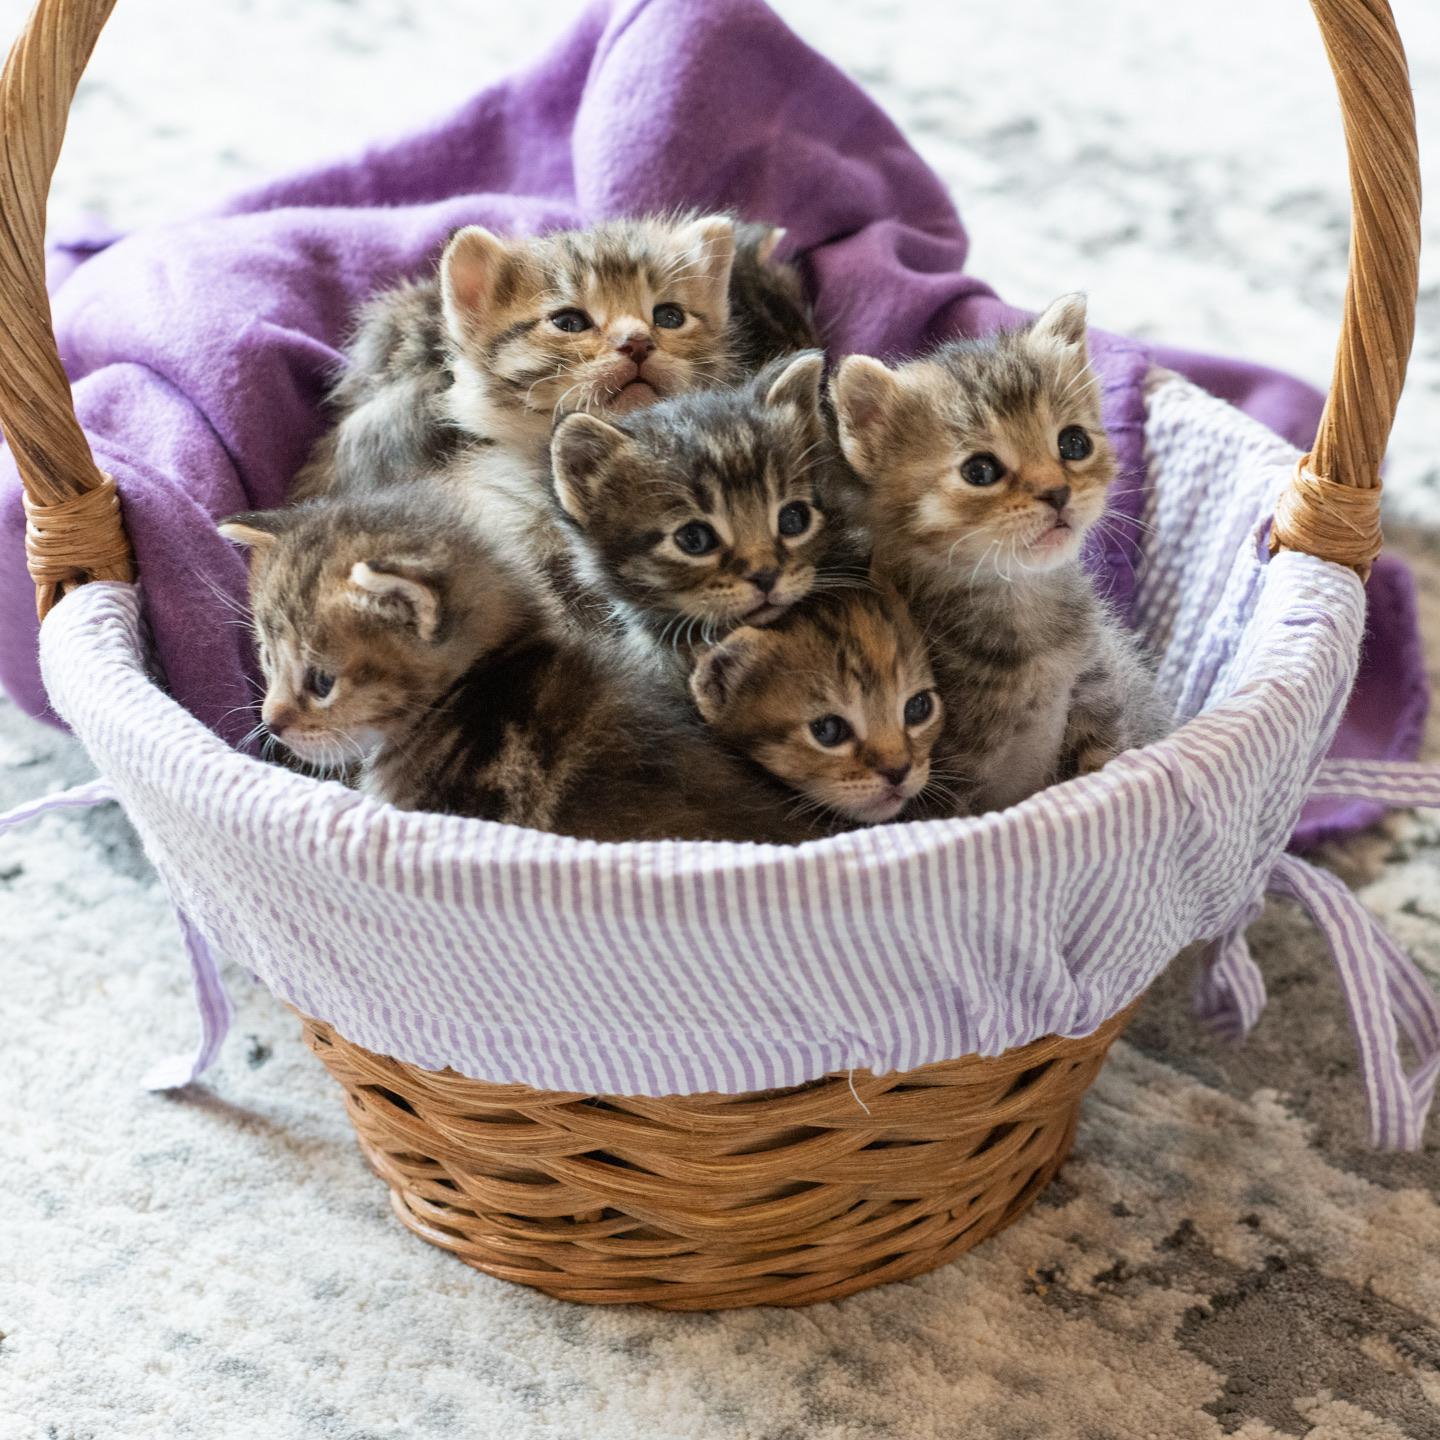 life lessons learned late  - “The saying is ‘kit and caboodle’ and not ‘kitten caboodle.’ Until I found out the real saying, I always pictured a big basket filled with kittens.” - u/Guac__is__extra__